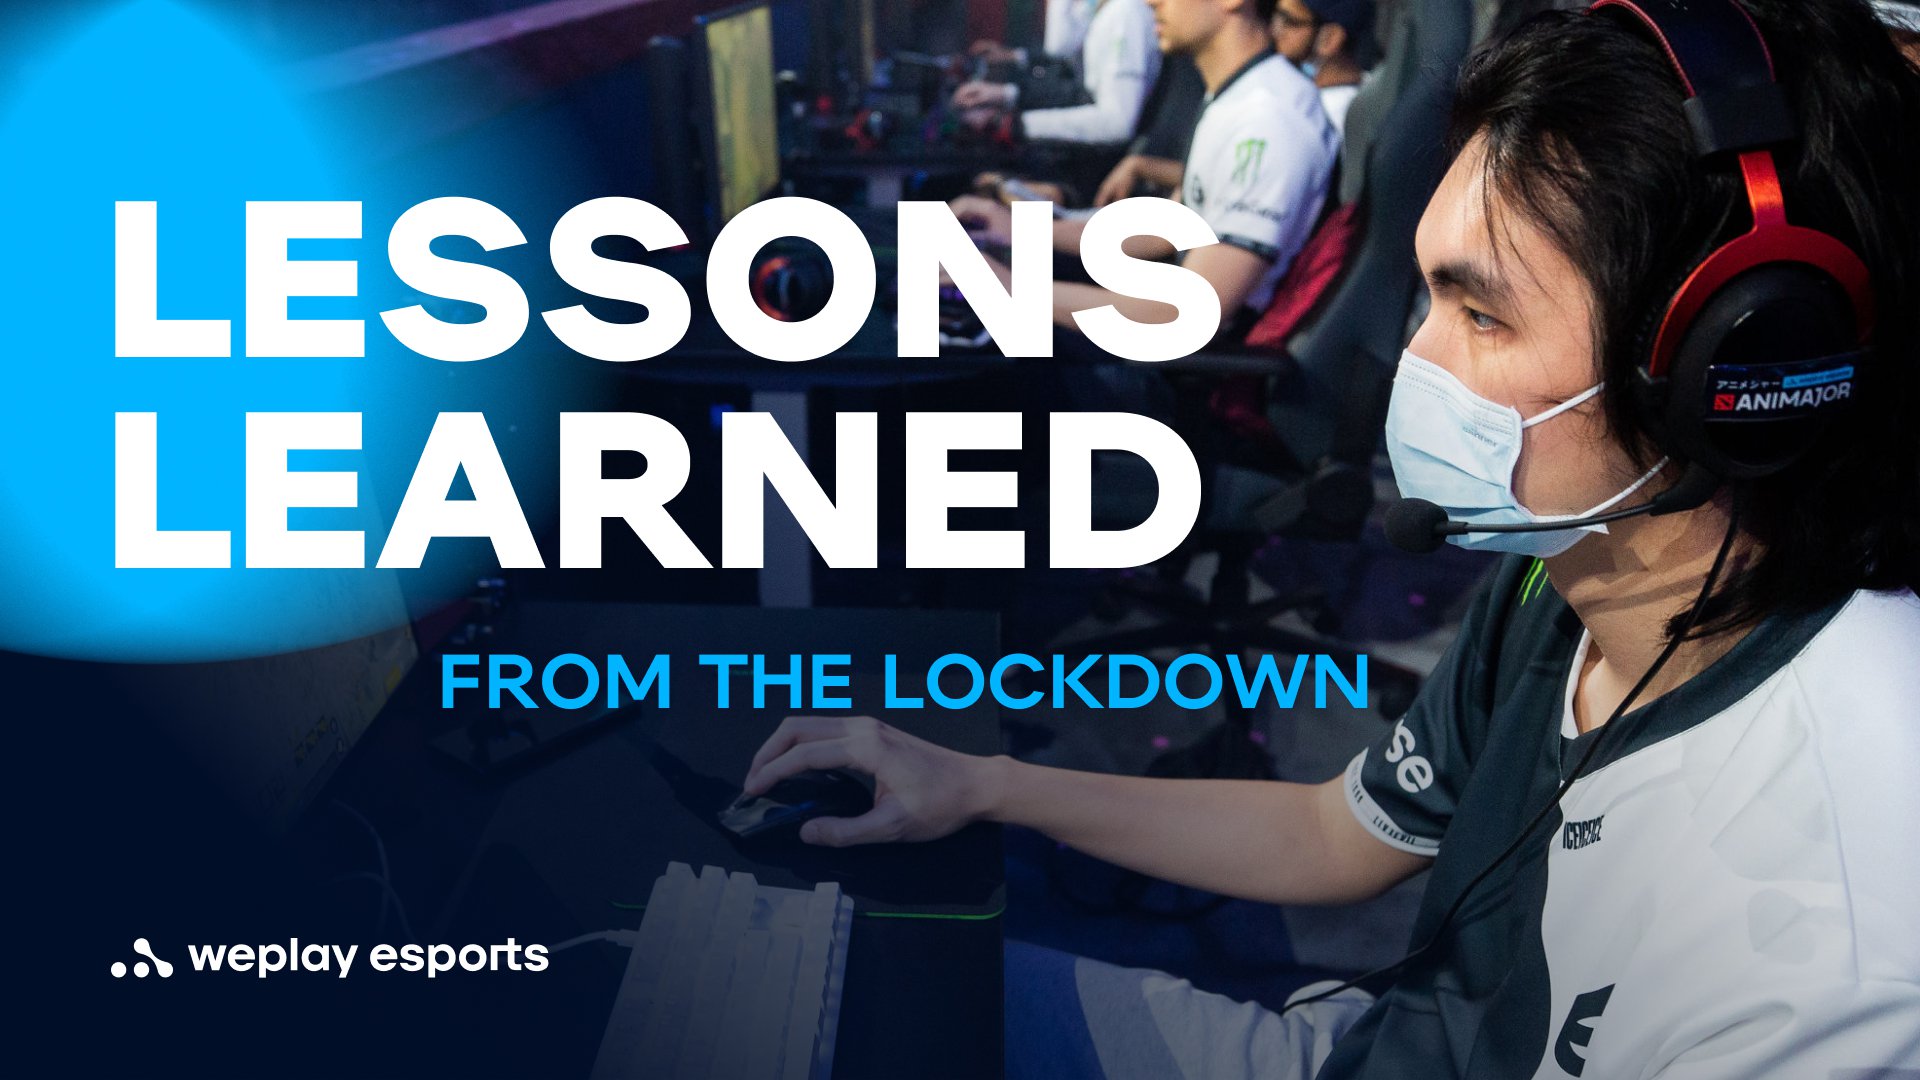 Lessons learned from the lockdown. Credit: WePlay Holding